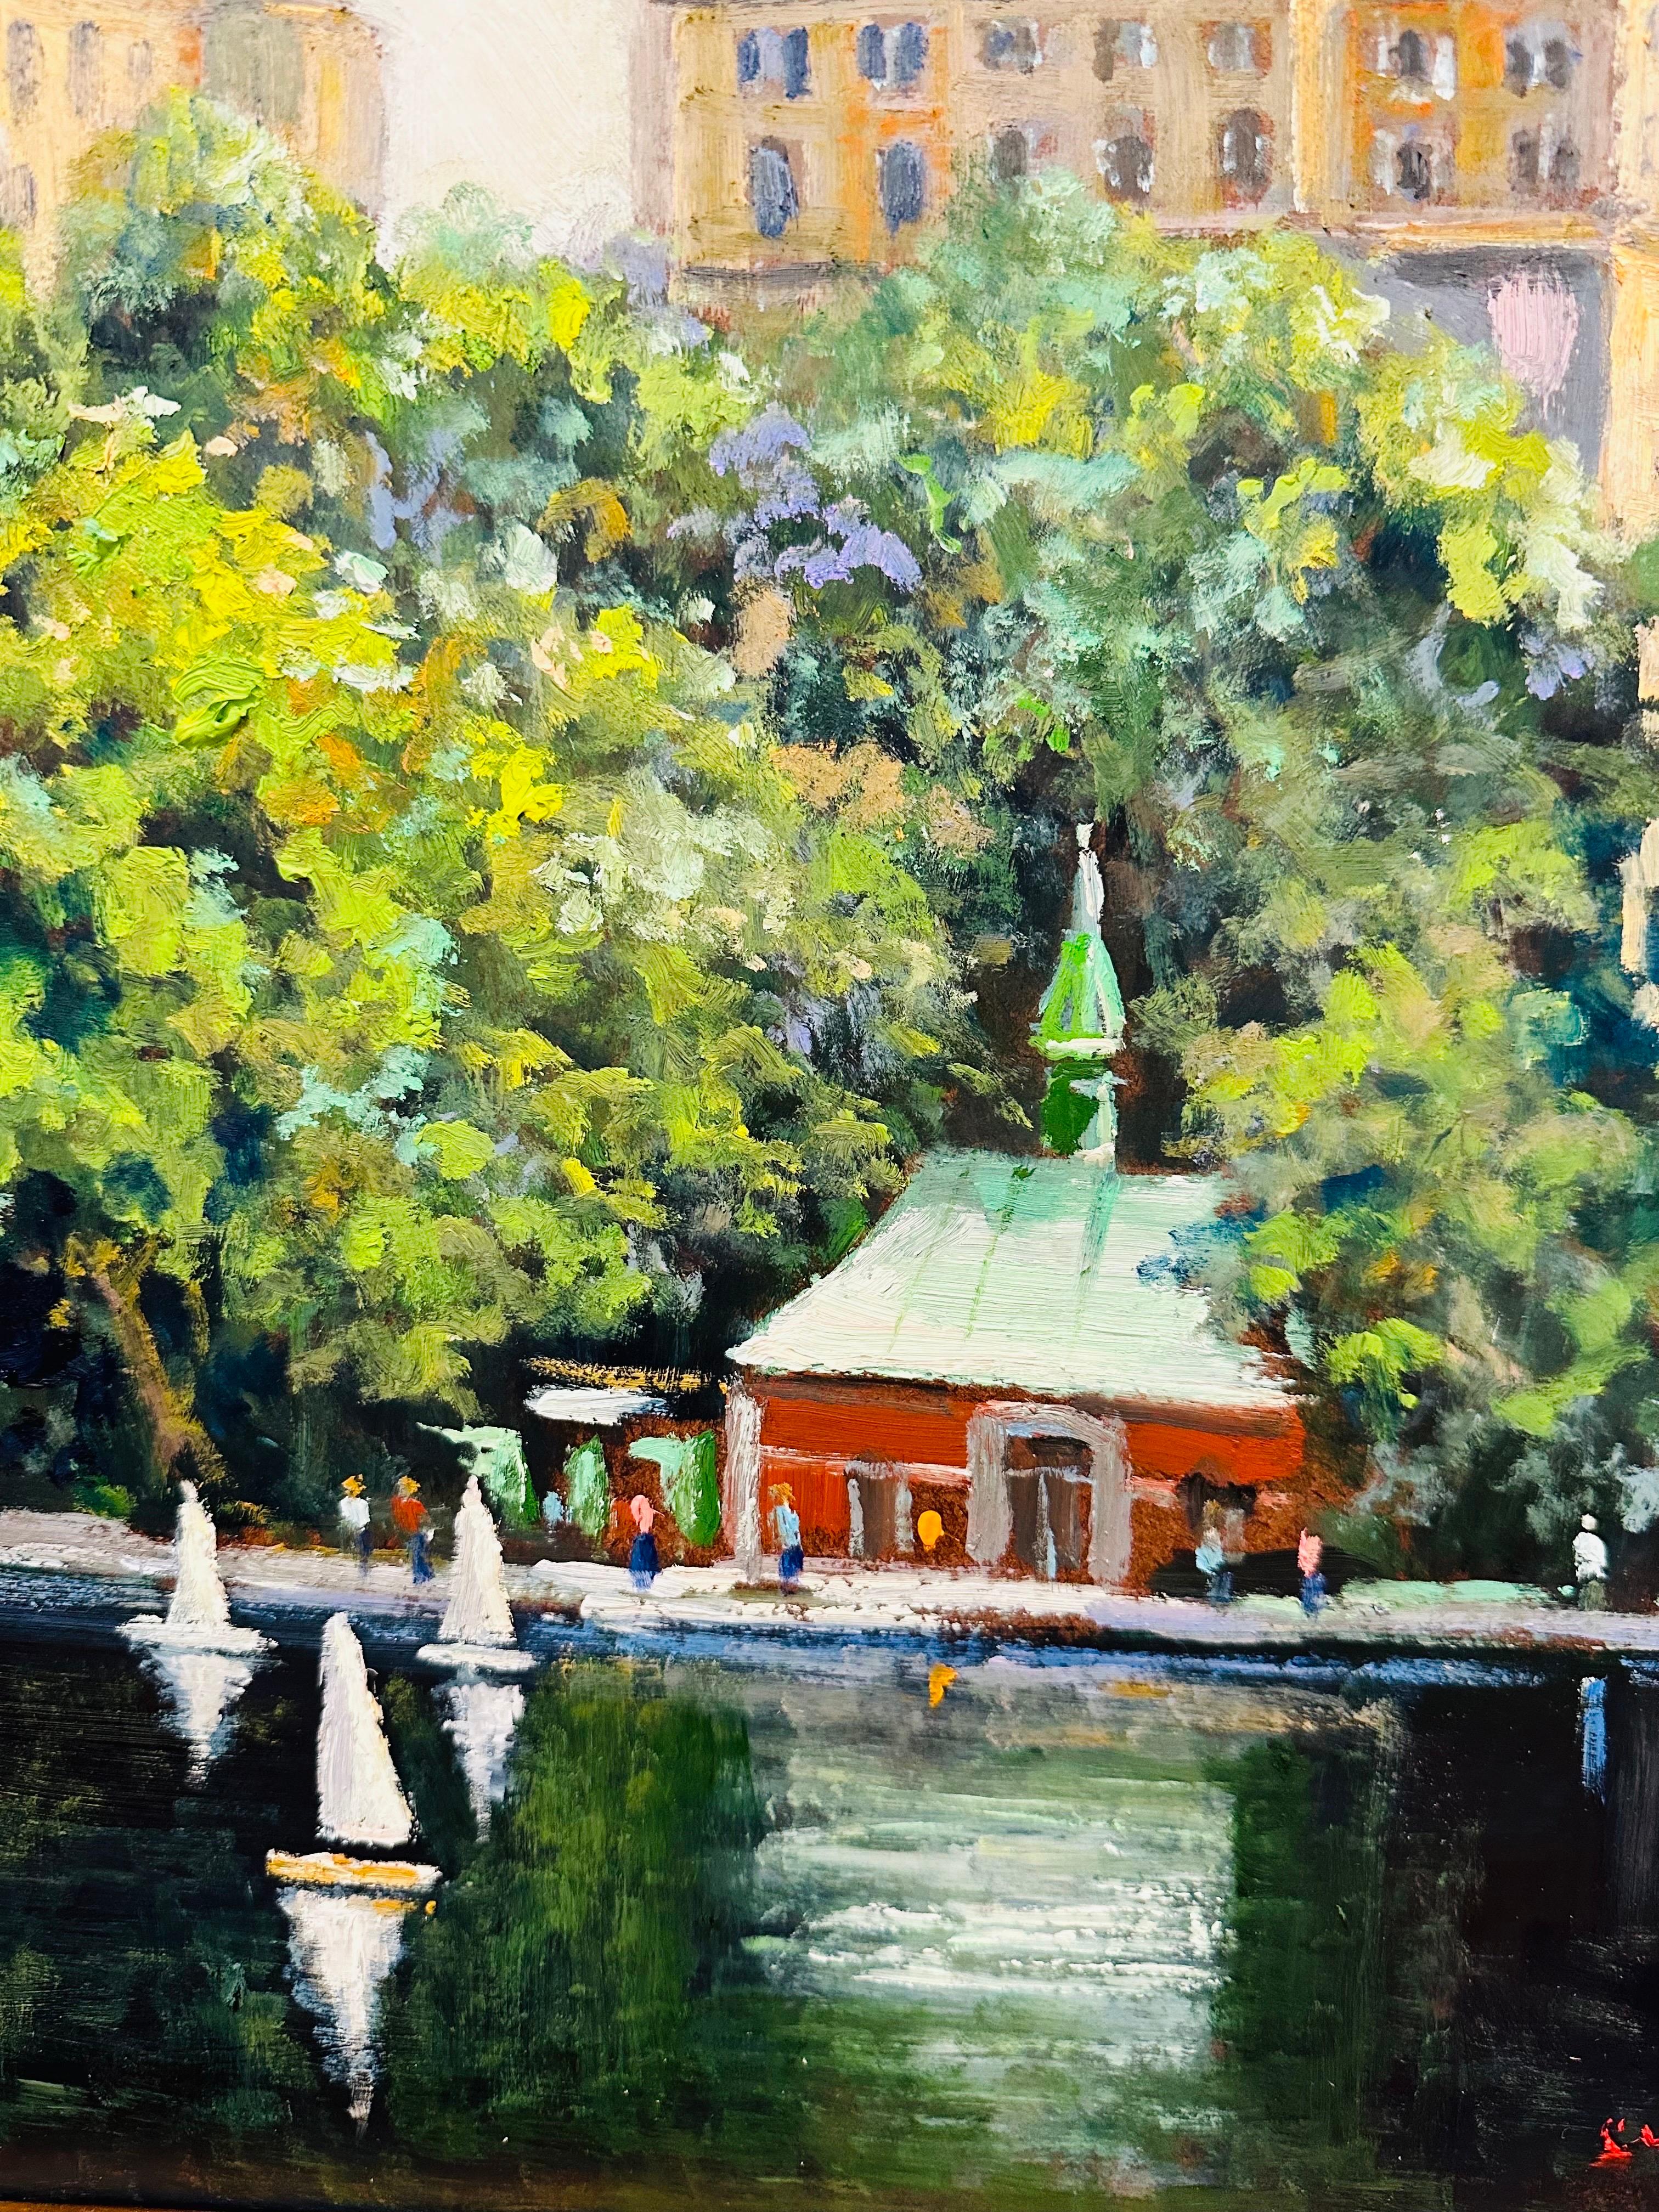 Impressionist New York City peaceful Central Park Boathouse scene depicting fully bloomed trees with pedestrians and sail boats enjoying a leisurely day. Birds flying high above the cityscape while the boathouse is tucked away. From early childhood